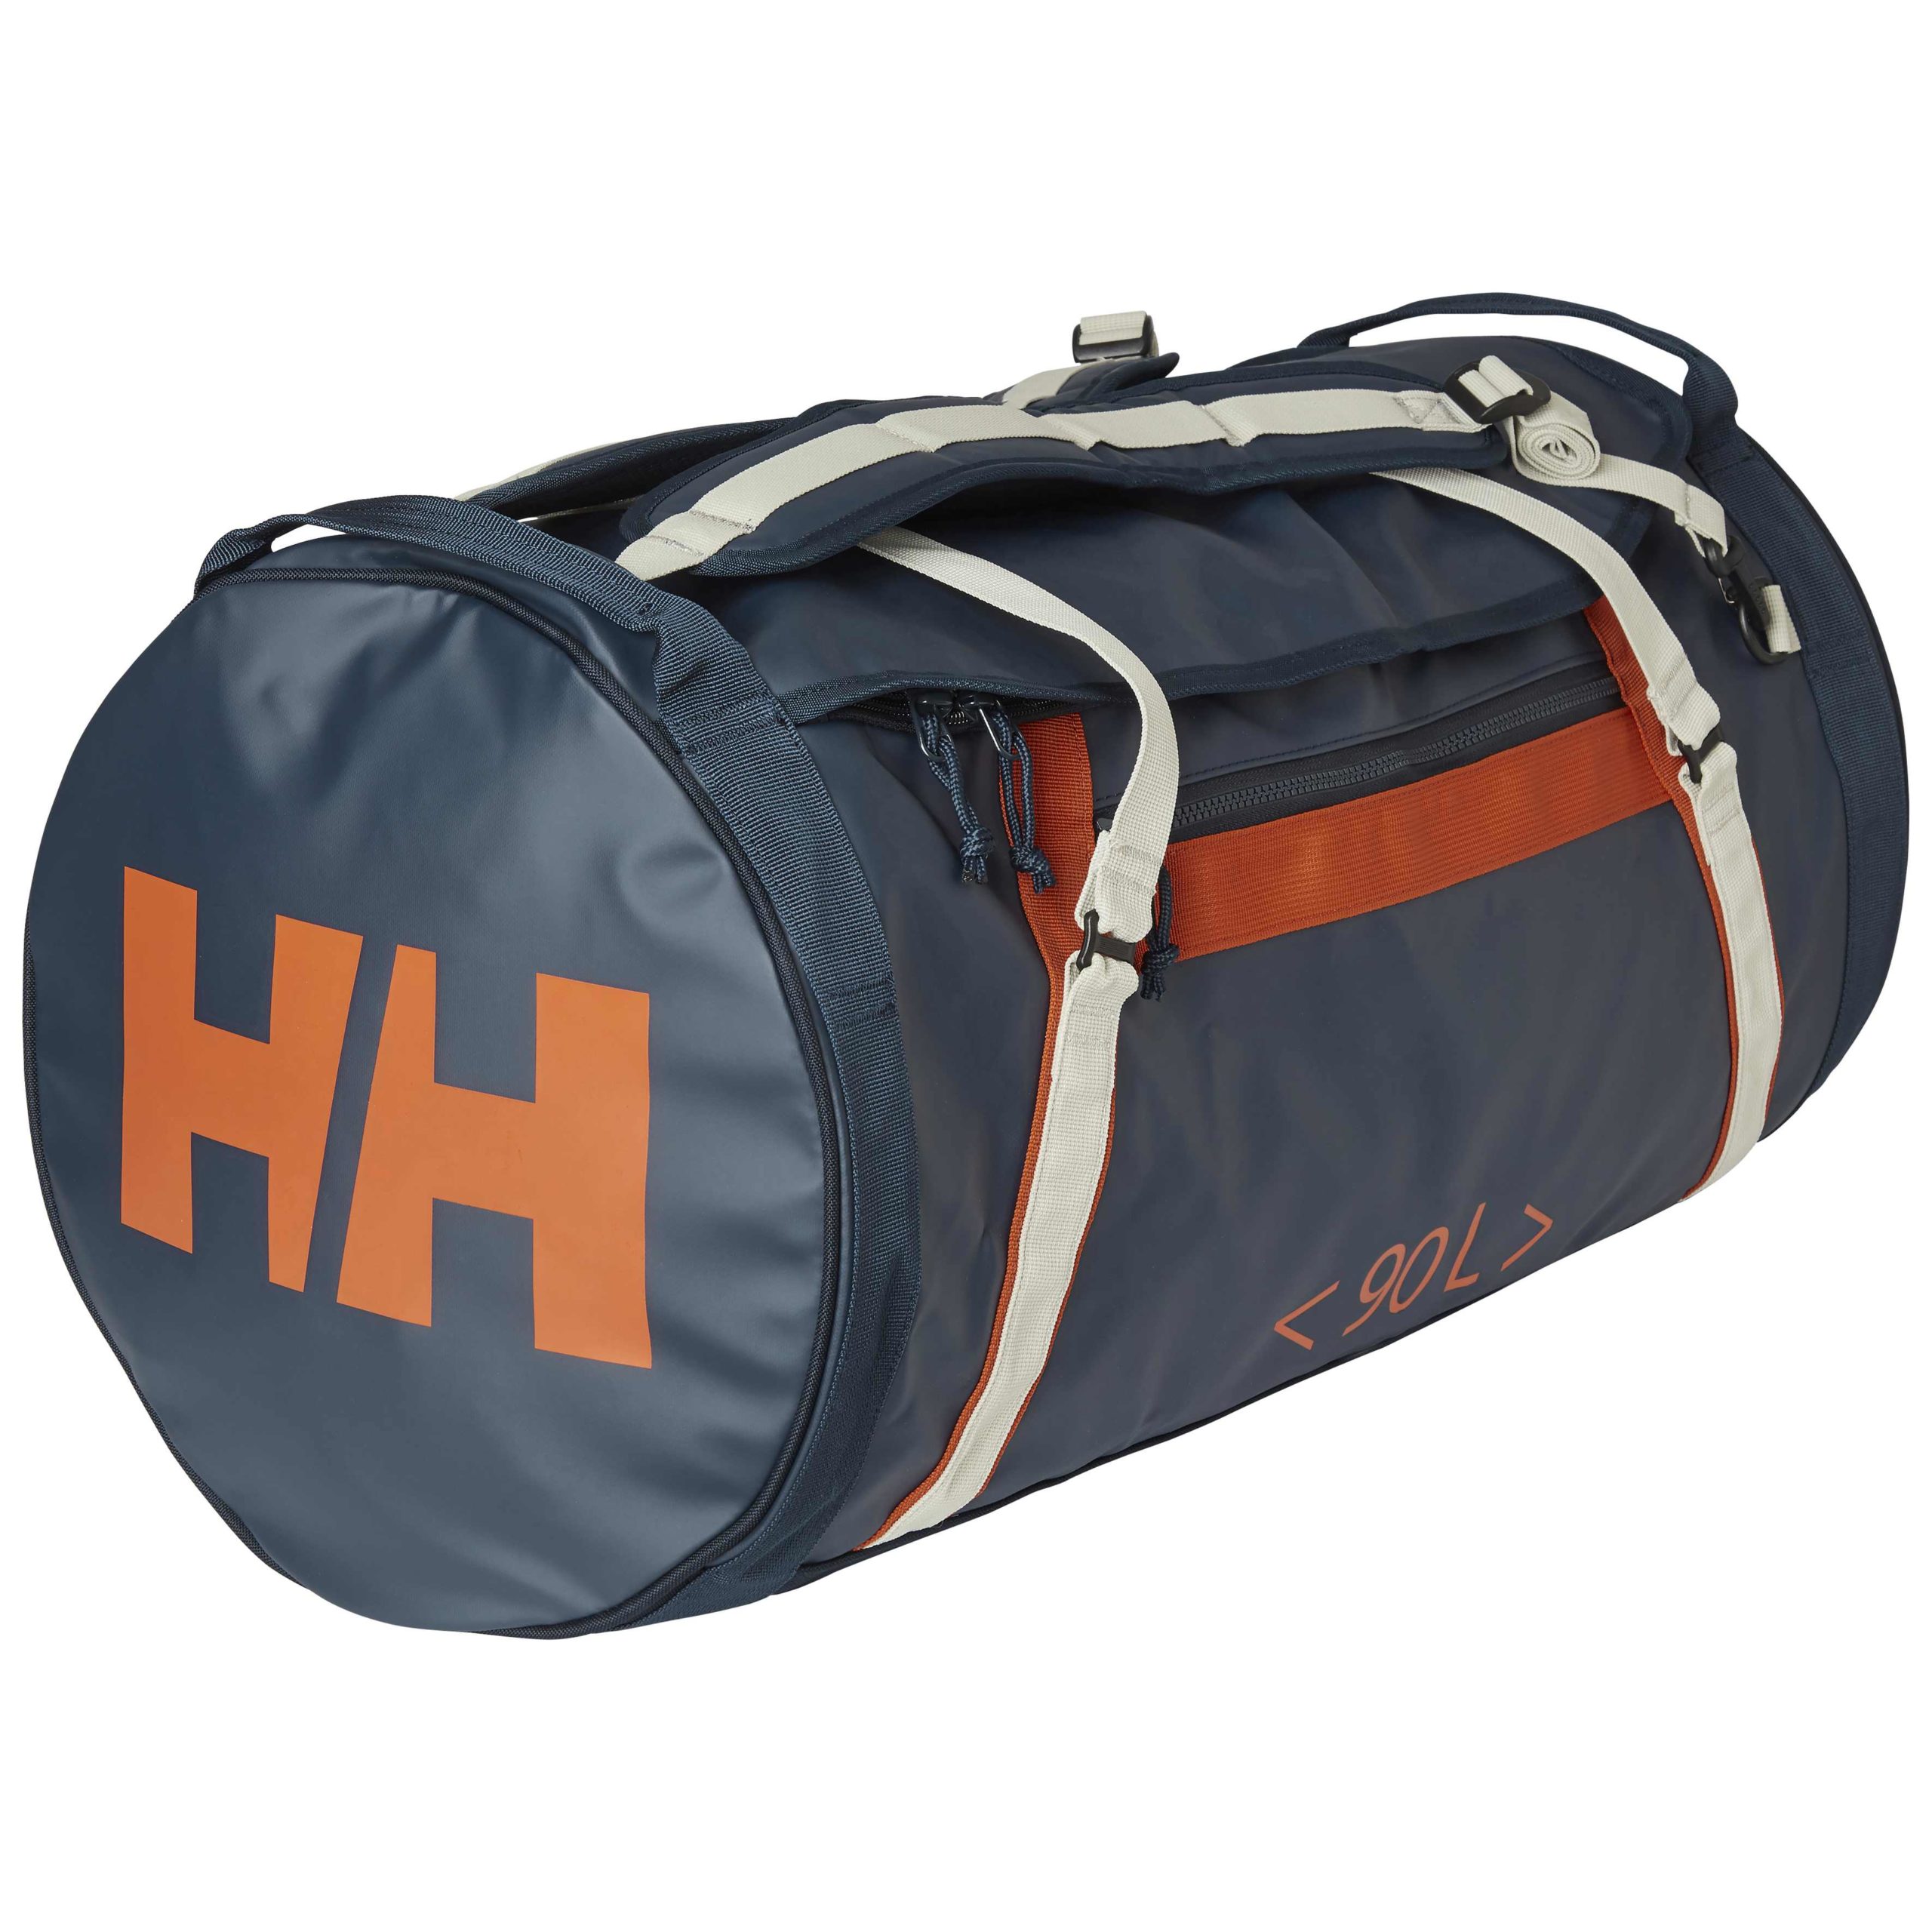  Helly Hansen Unisex HH Duffel Bag 2 50L, 990 Black, One Size :  Clothing, Shoes & Jewelry